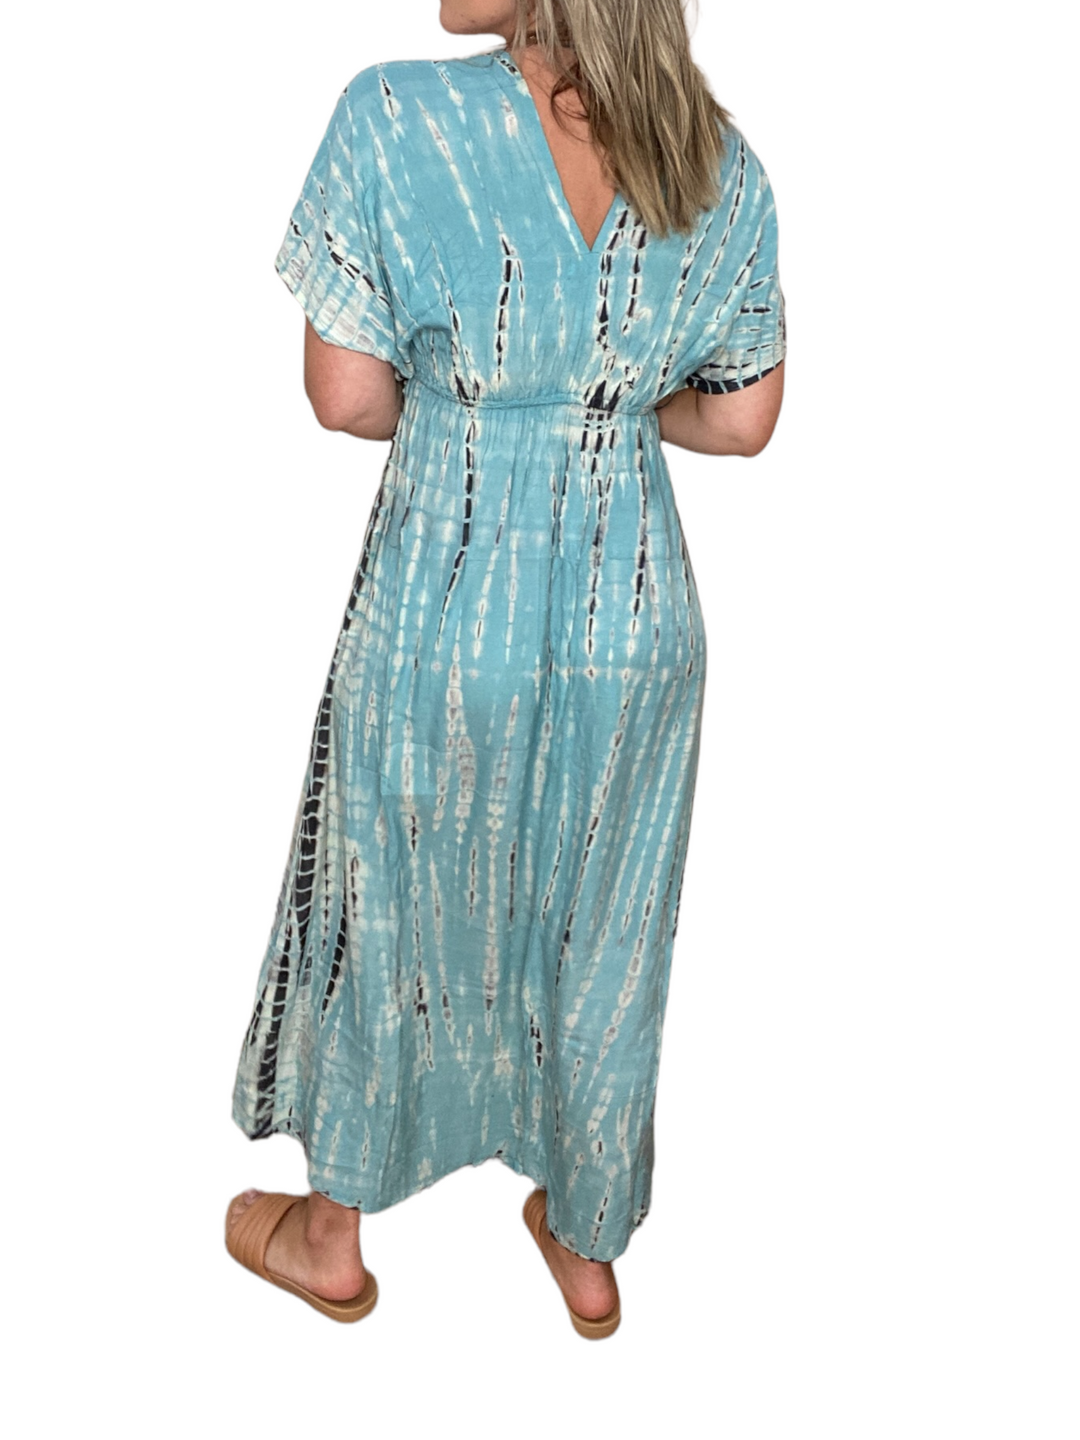 MAXI BUTTERFLY DRESS - BLUE TURQUOISE SHIBORI - Kingfisher Road - Online Boutique